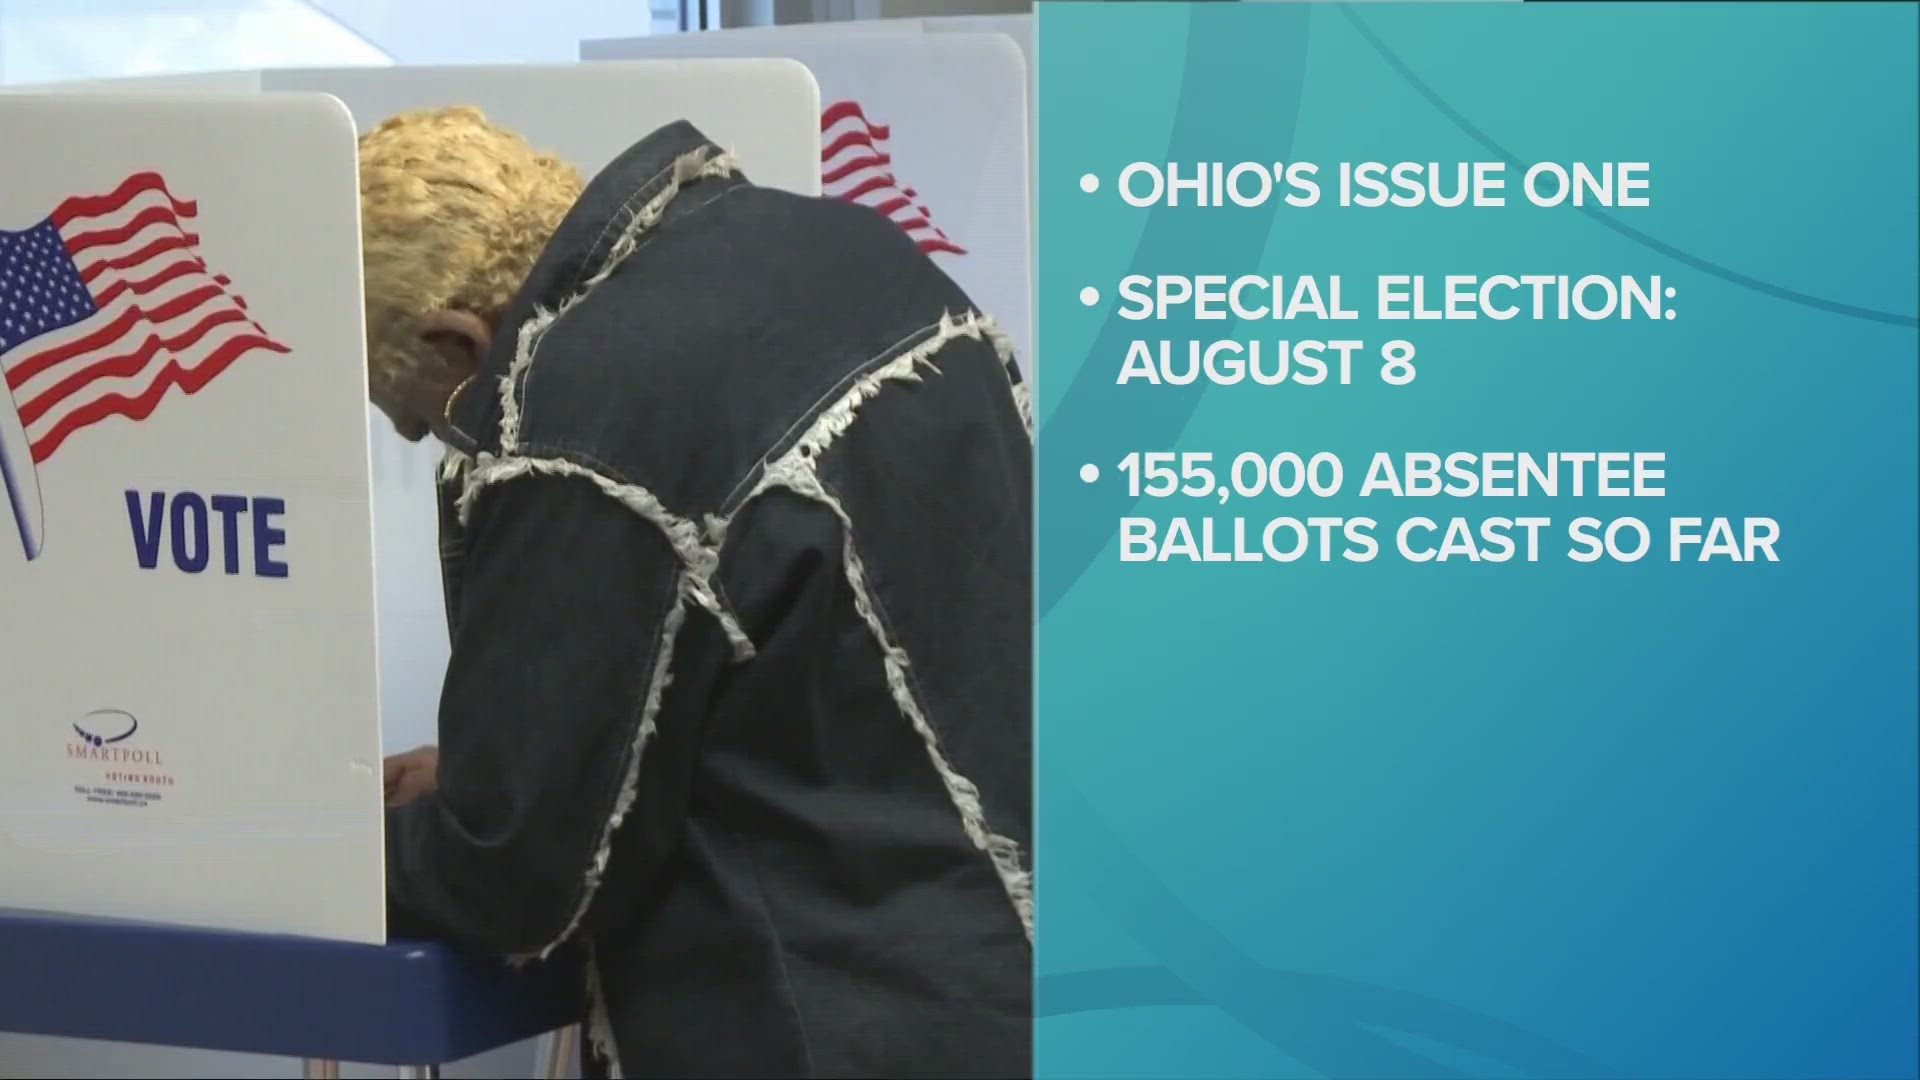 More than 155,000 early ballots have already been cast.